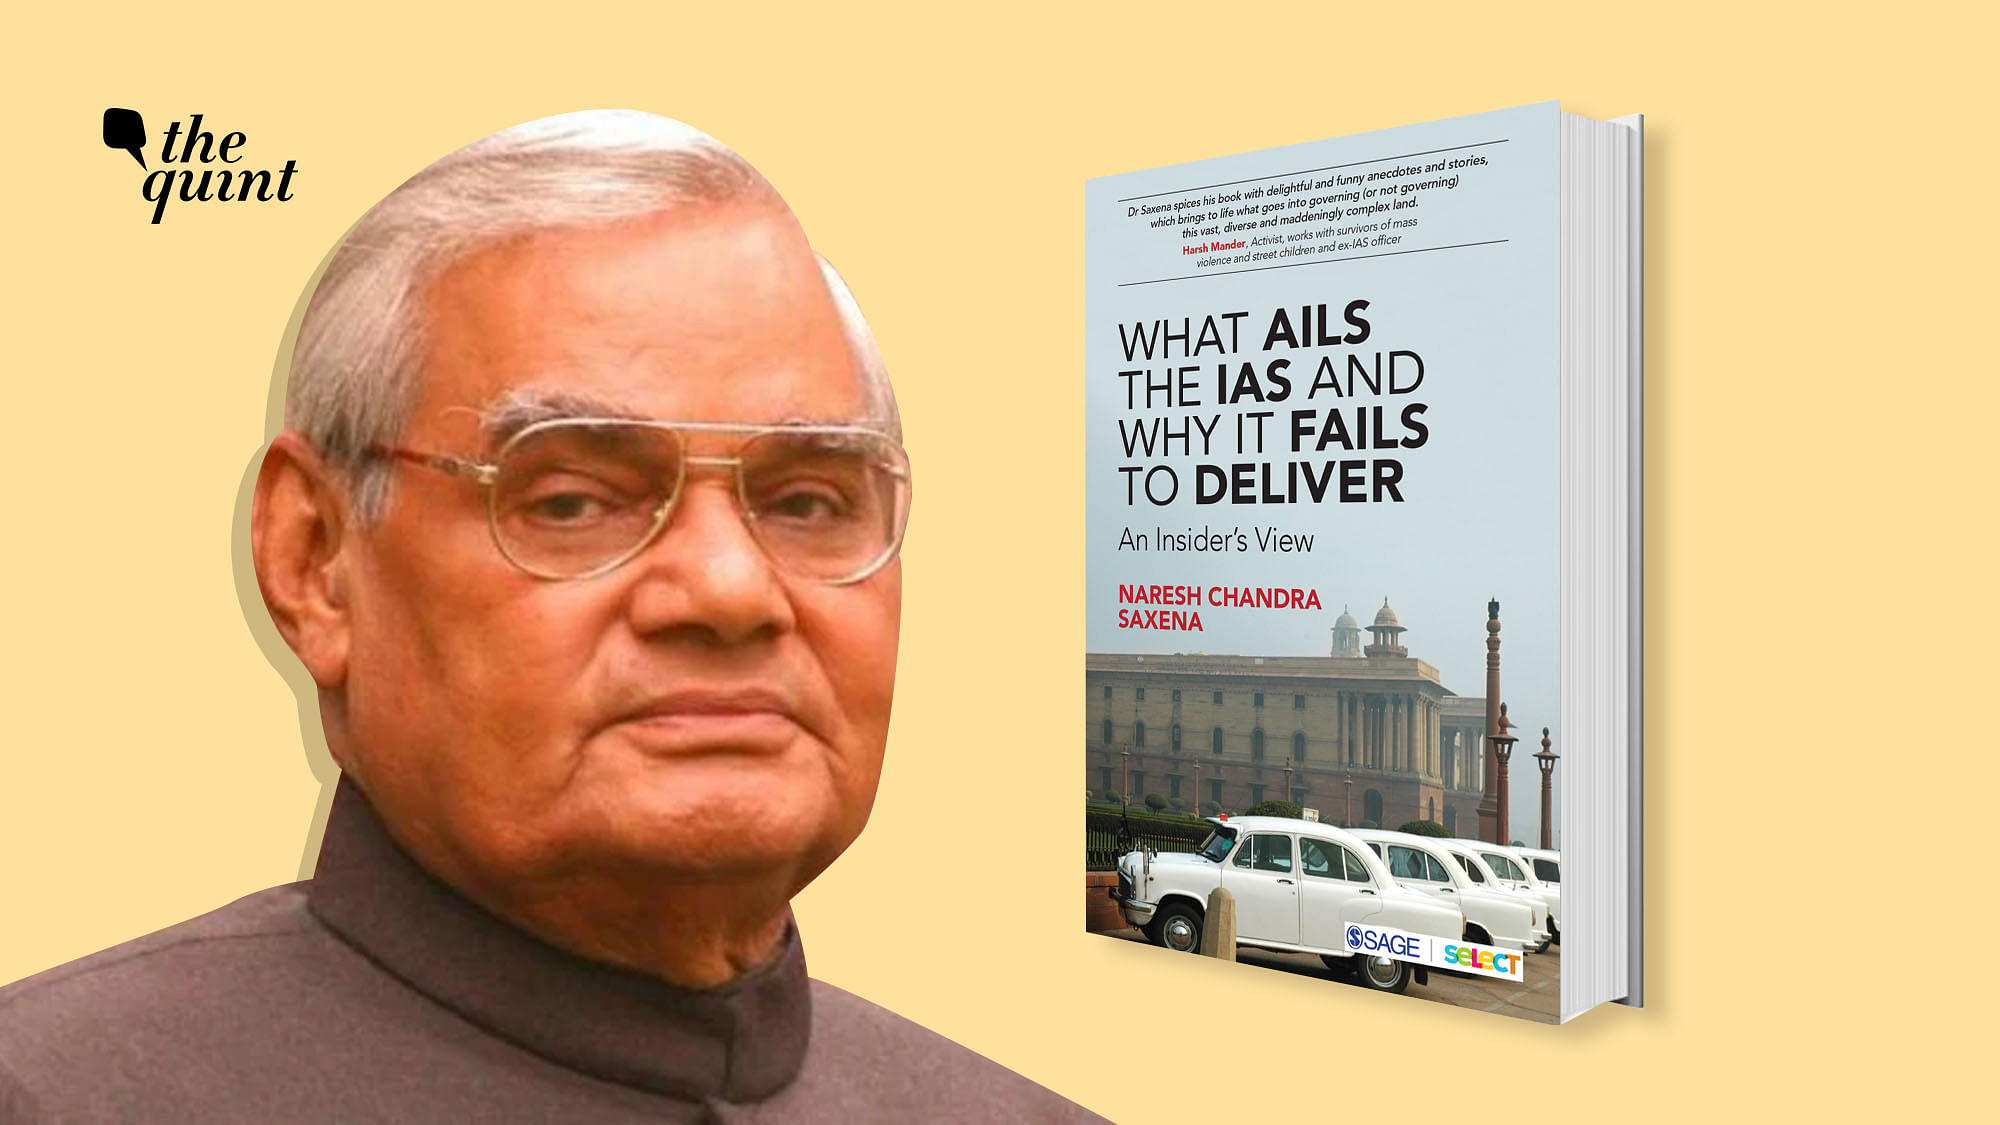 Image of ex-IAS officer Naresh Chandra Saxena’s book cover, and late PM Atal Bihari Vajpayee, used for representational purposes.